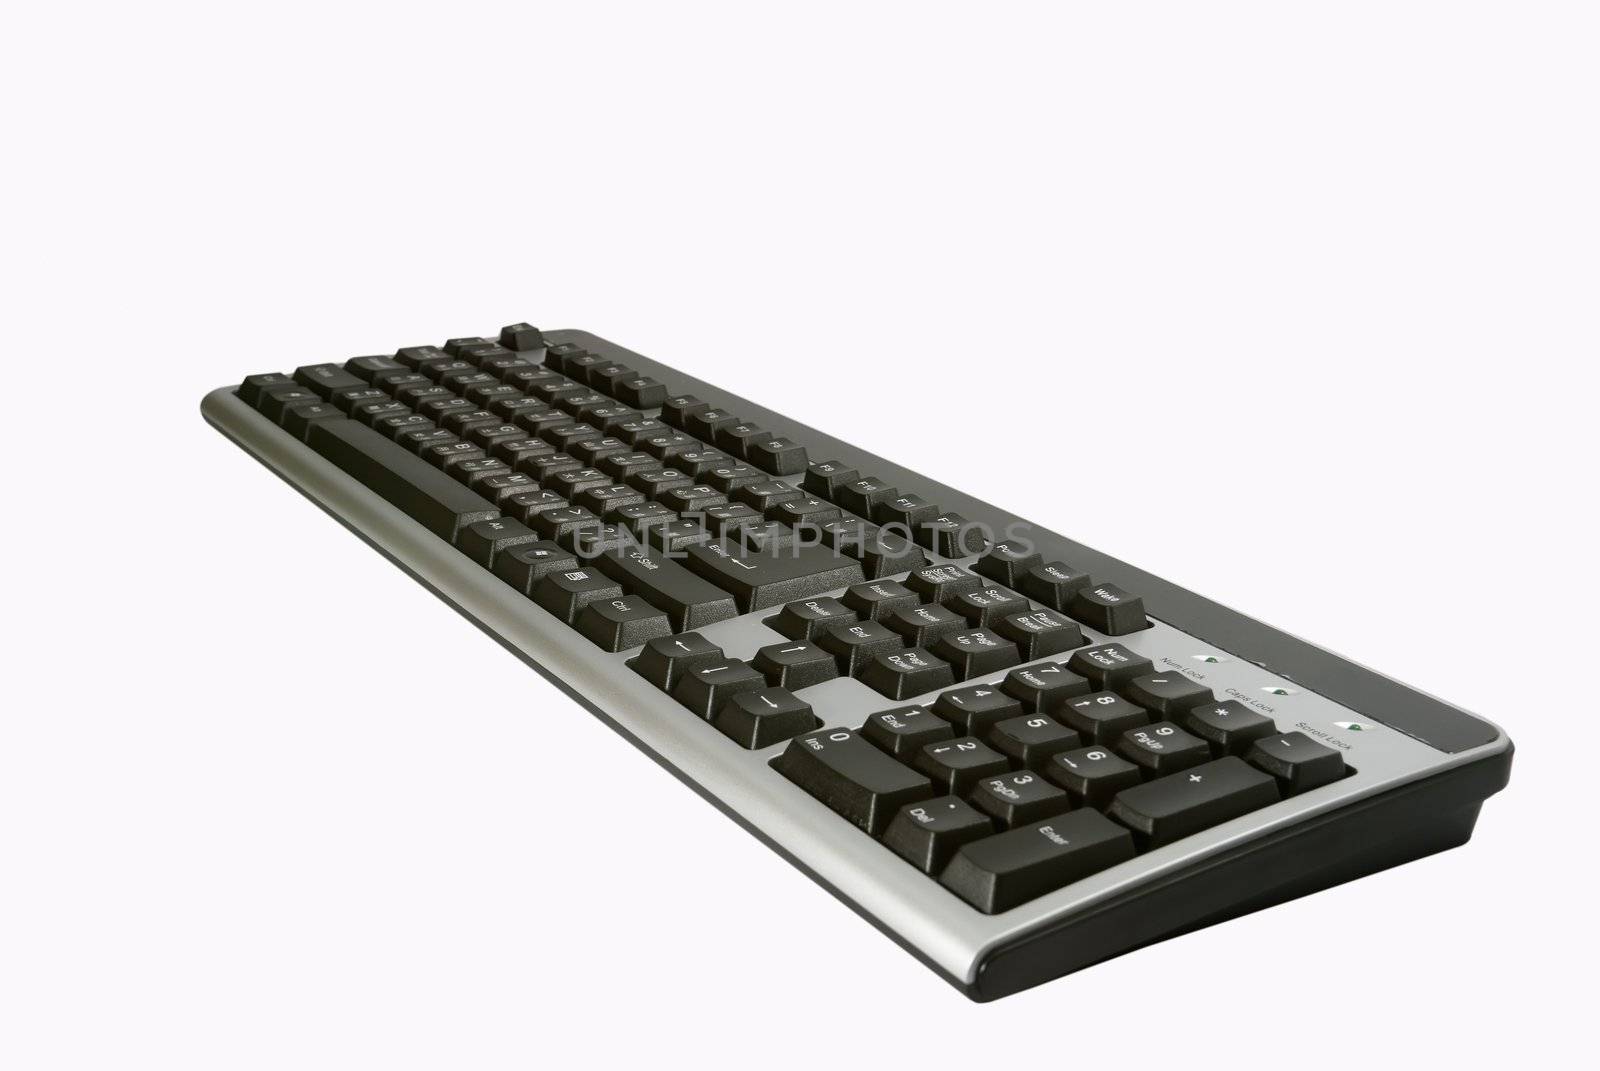 It is a computer keyboard, everyone like you and me used everyday.